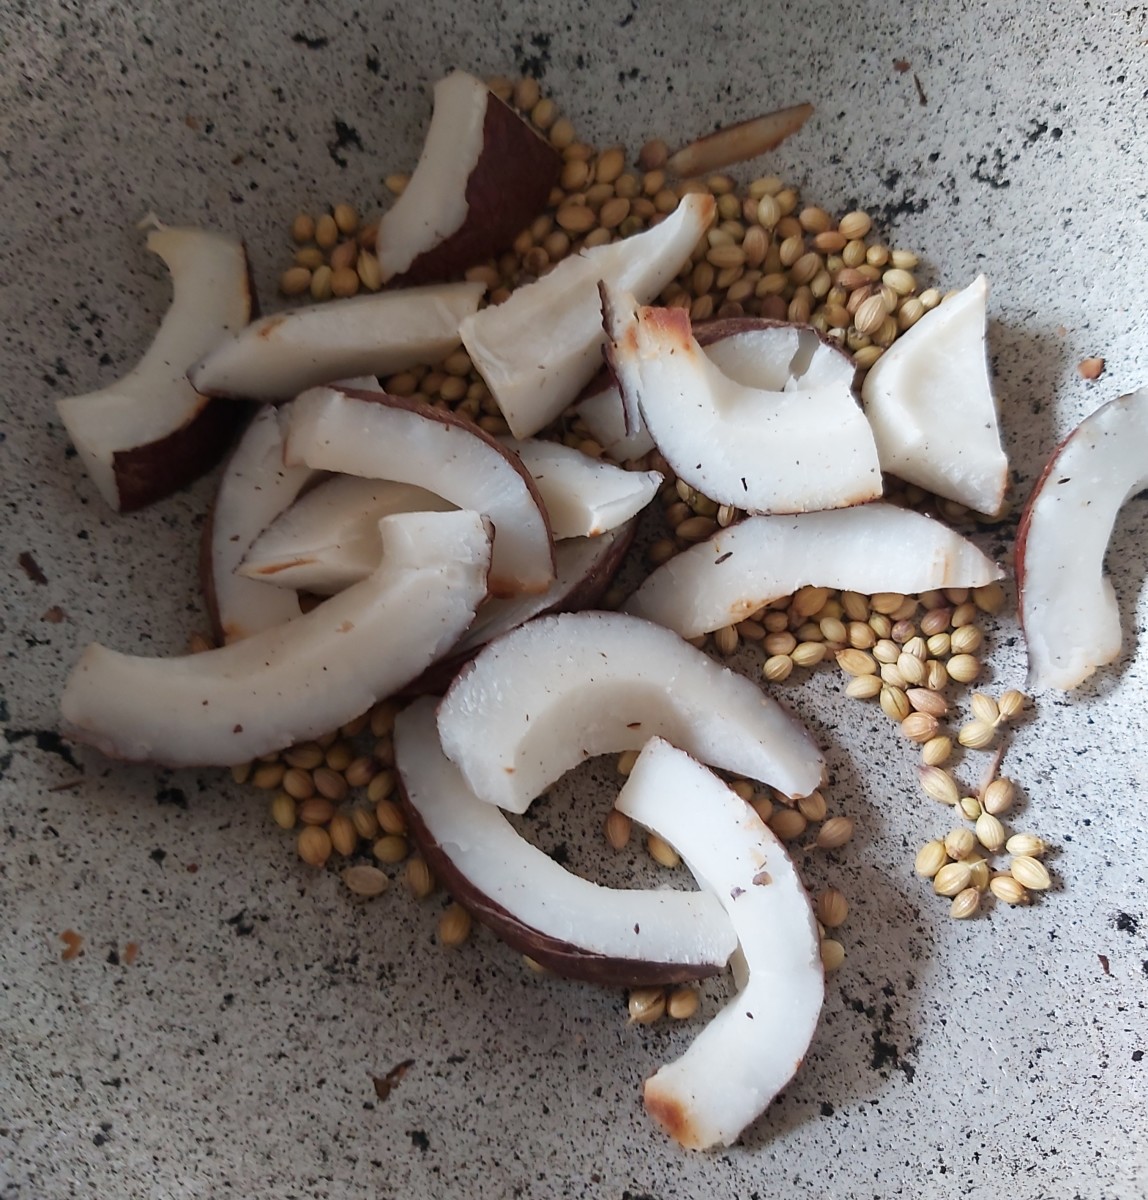 Add 2-3 teaspoons of coriander seeds, fry for 1 minute. Off the flame and allow it to cool down.